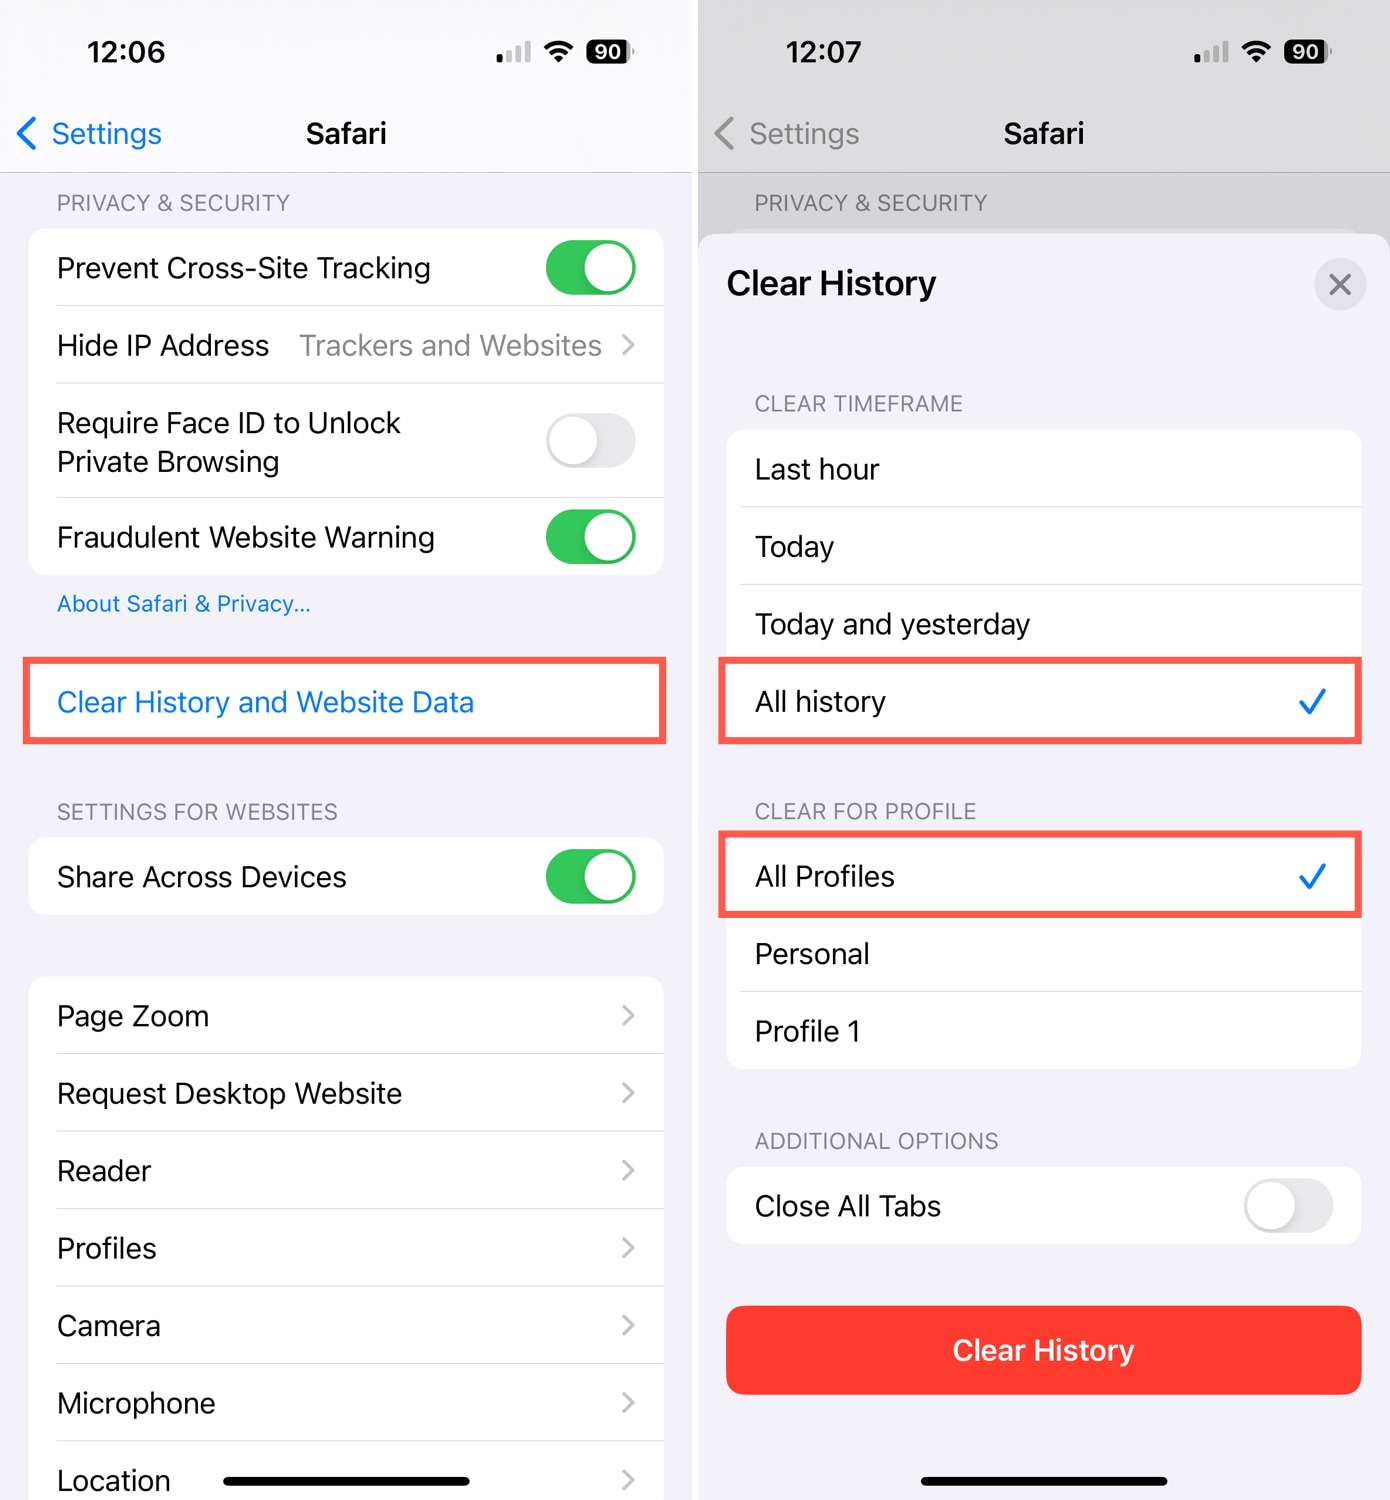 Clear History and Website Data in the Safari settings